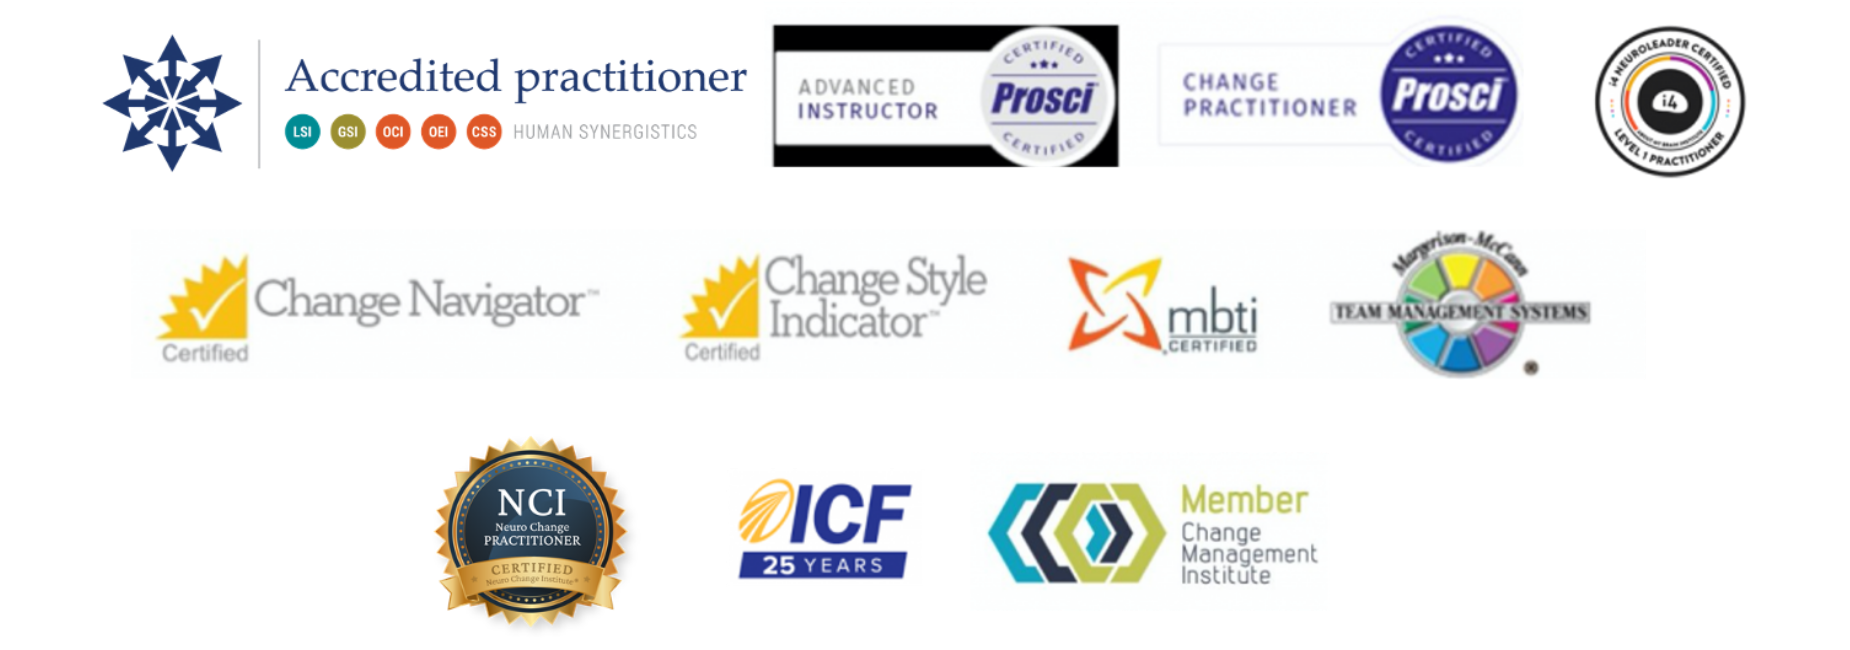 Accreditations and Memberships of Change in Practice